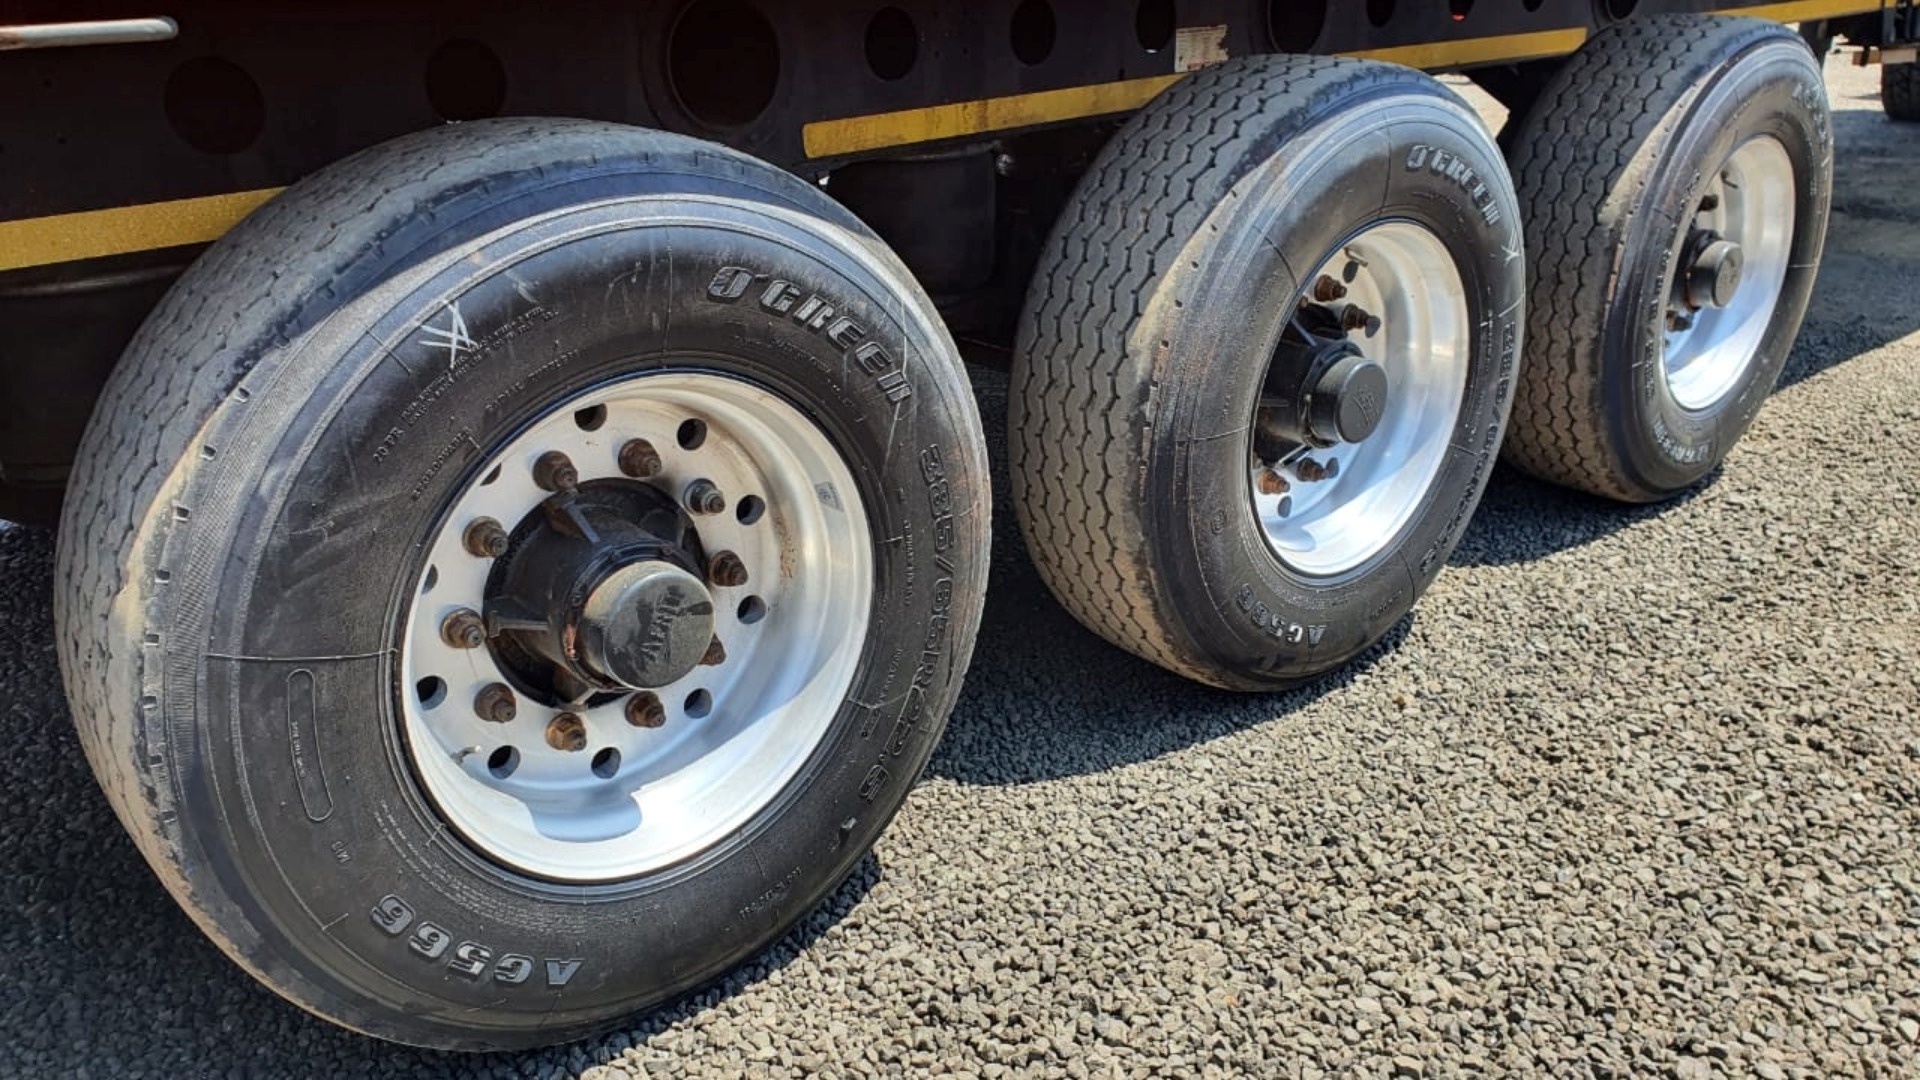 Afrit Trailers Grain carrier AFRIT ALUMINIUM WALKING FLOOR TRI AXLE TRAILER 2018 for sale by ZA Trucks and Trailers Sales | Truck & Trailer Marketplaces